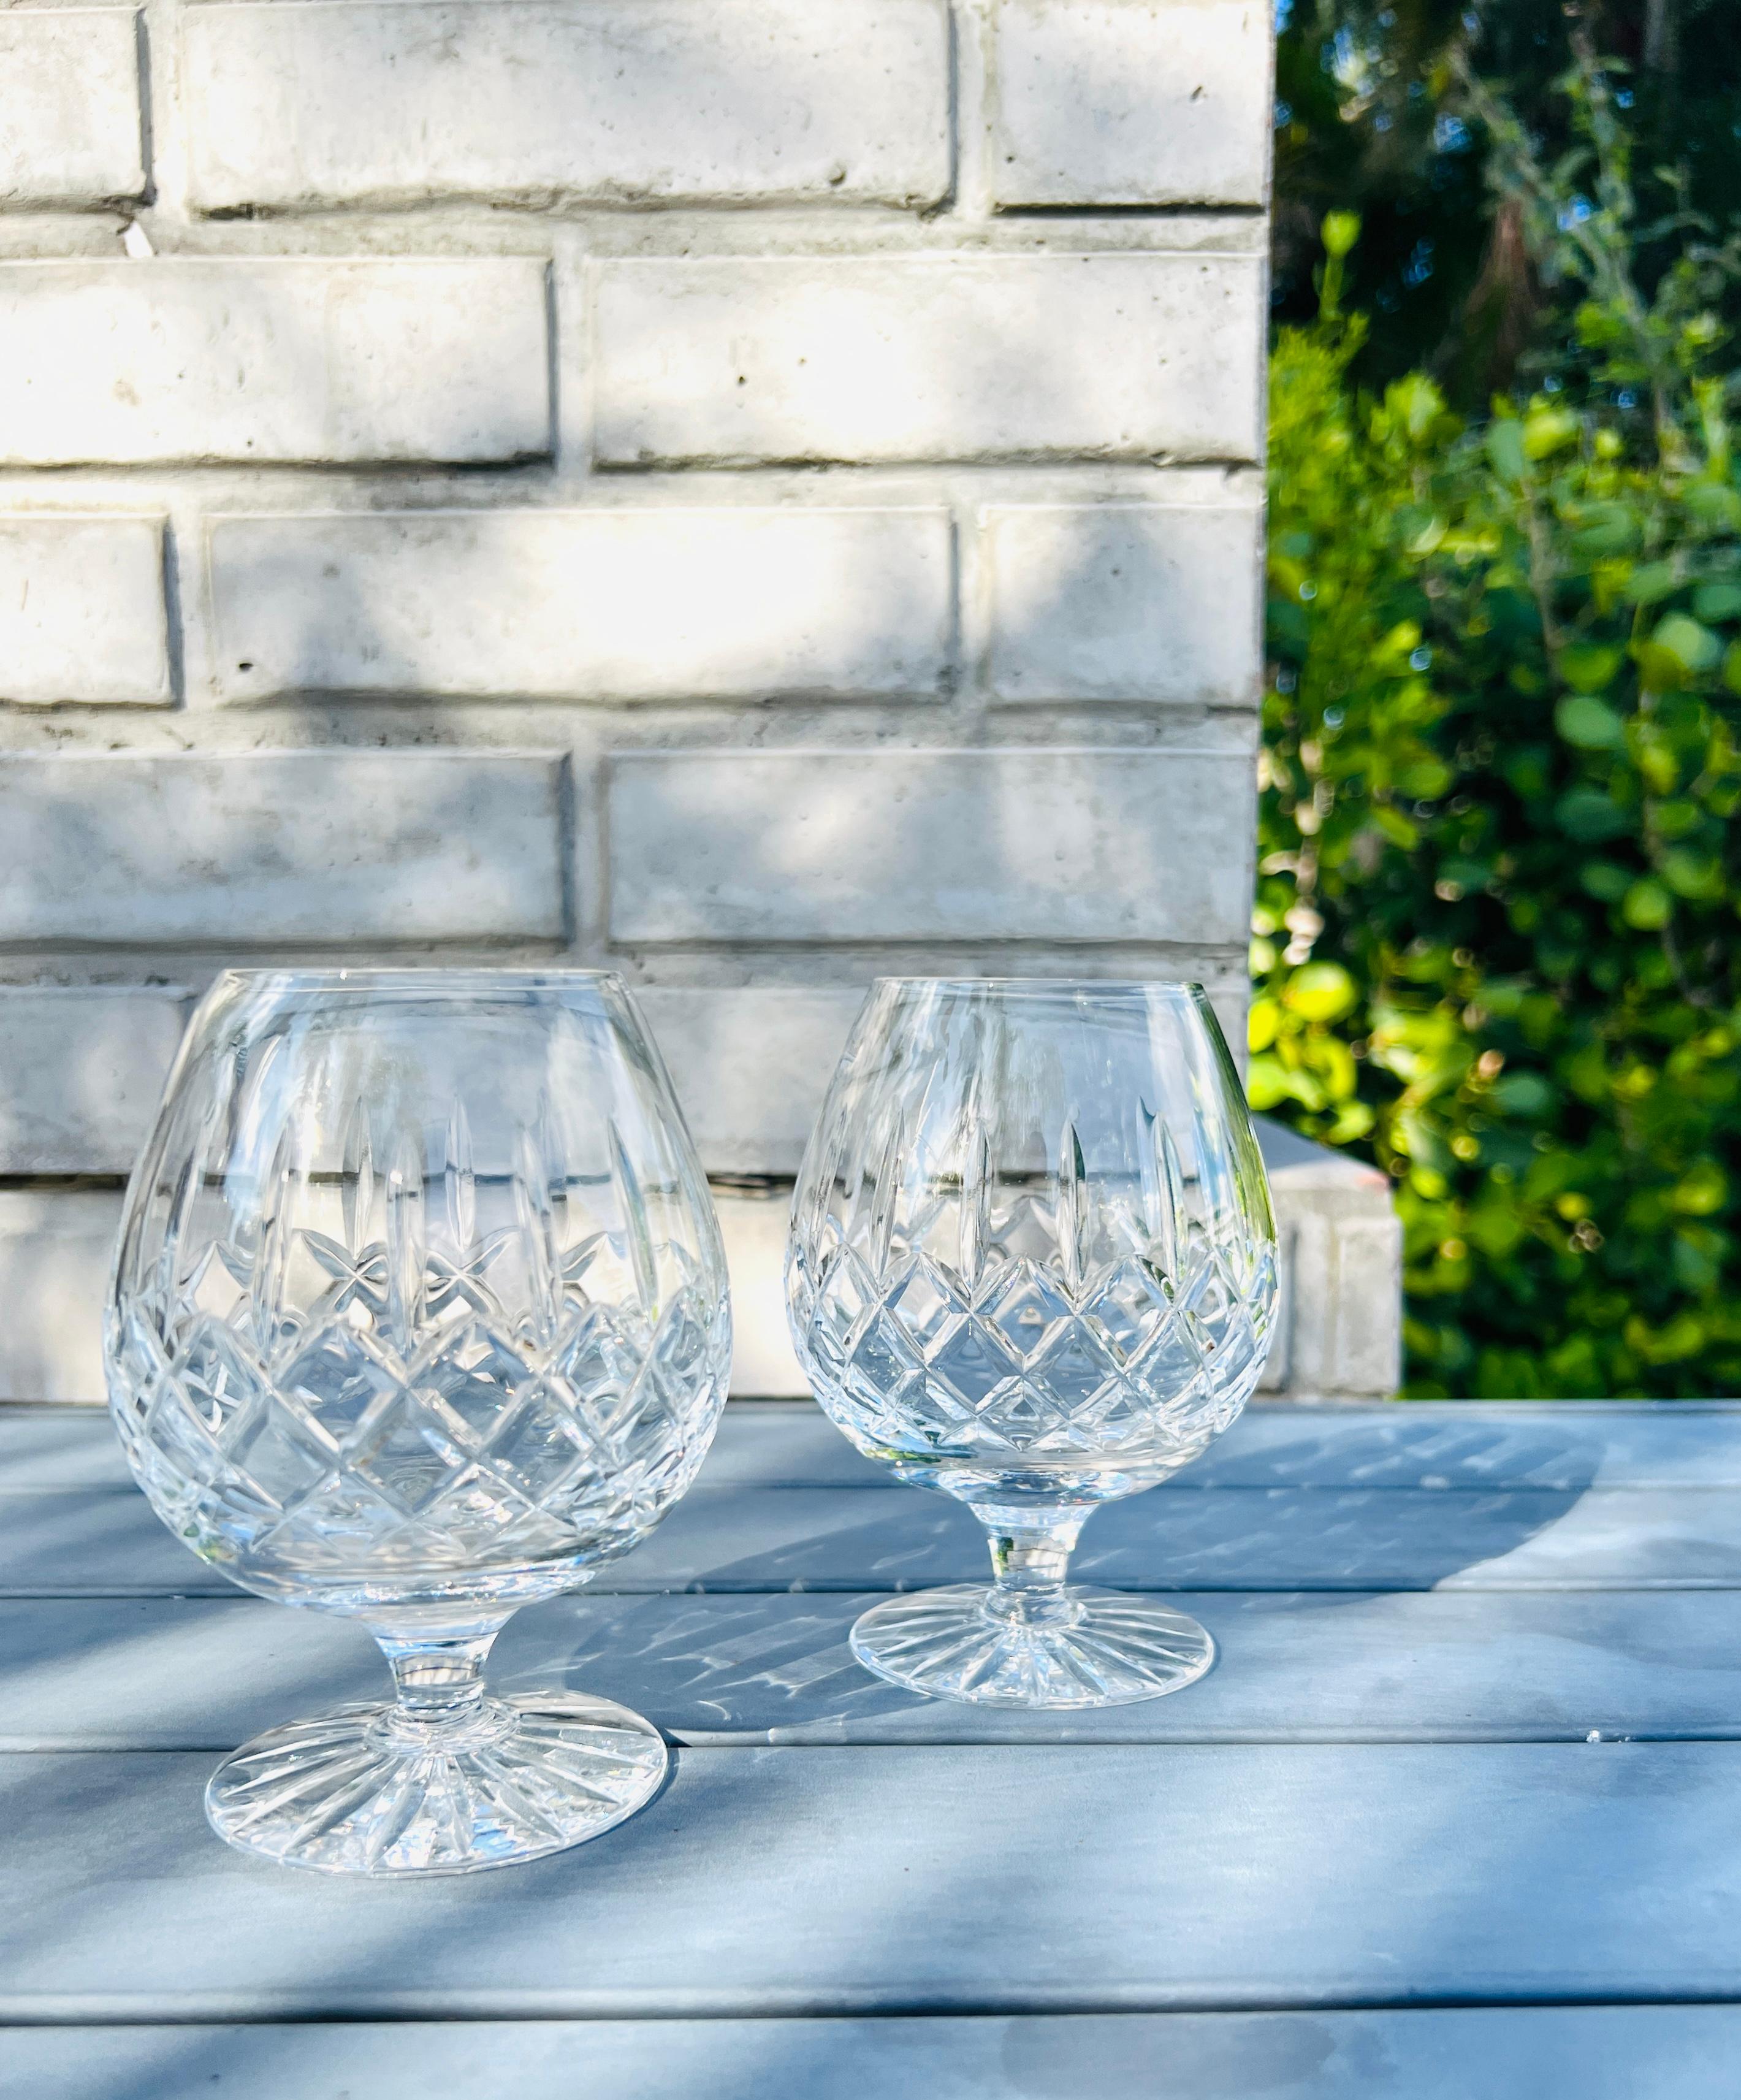 Late 20th Century Pair of Vintage Cut Crystal Brandy Glasses by Waterford Crystal, c. 1980's For Sale